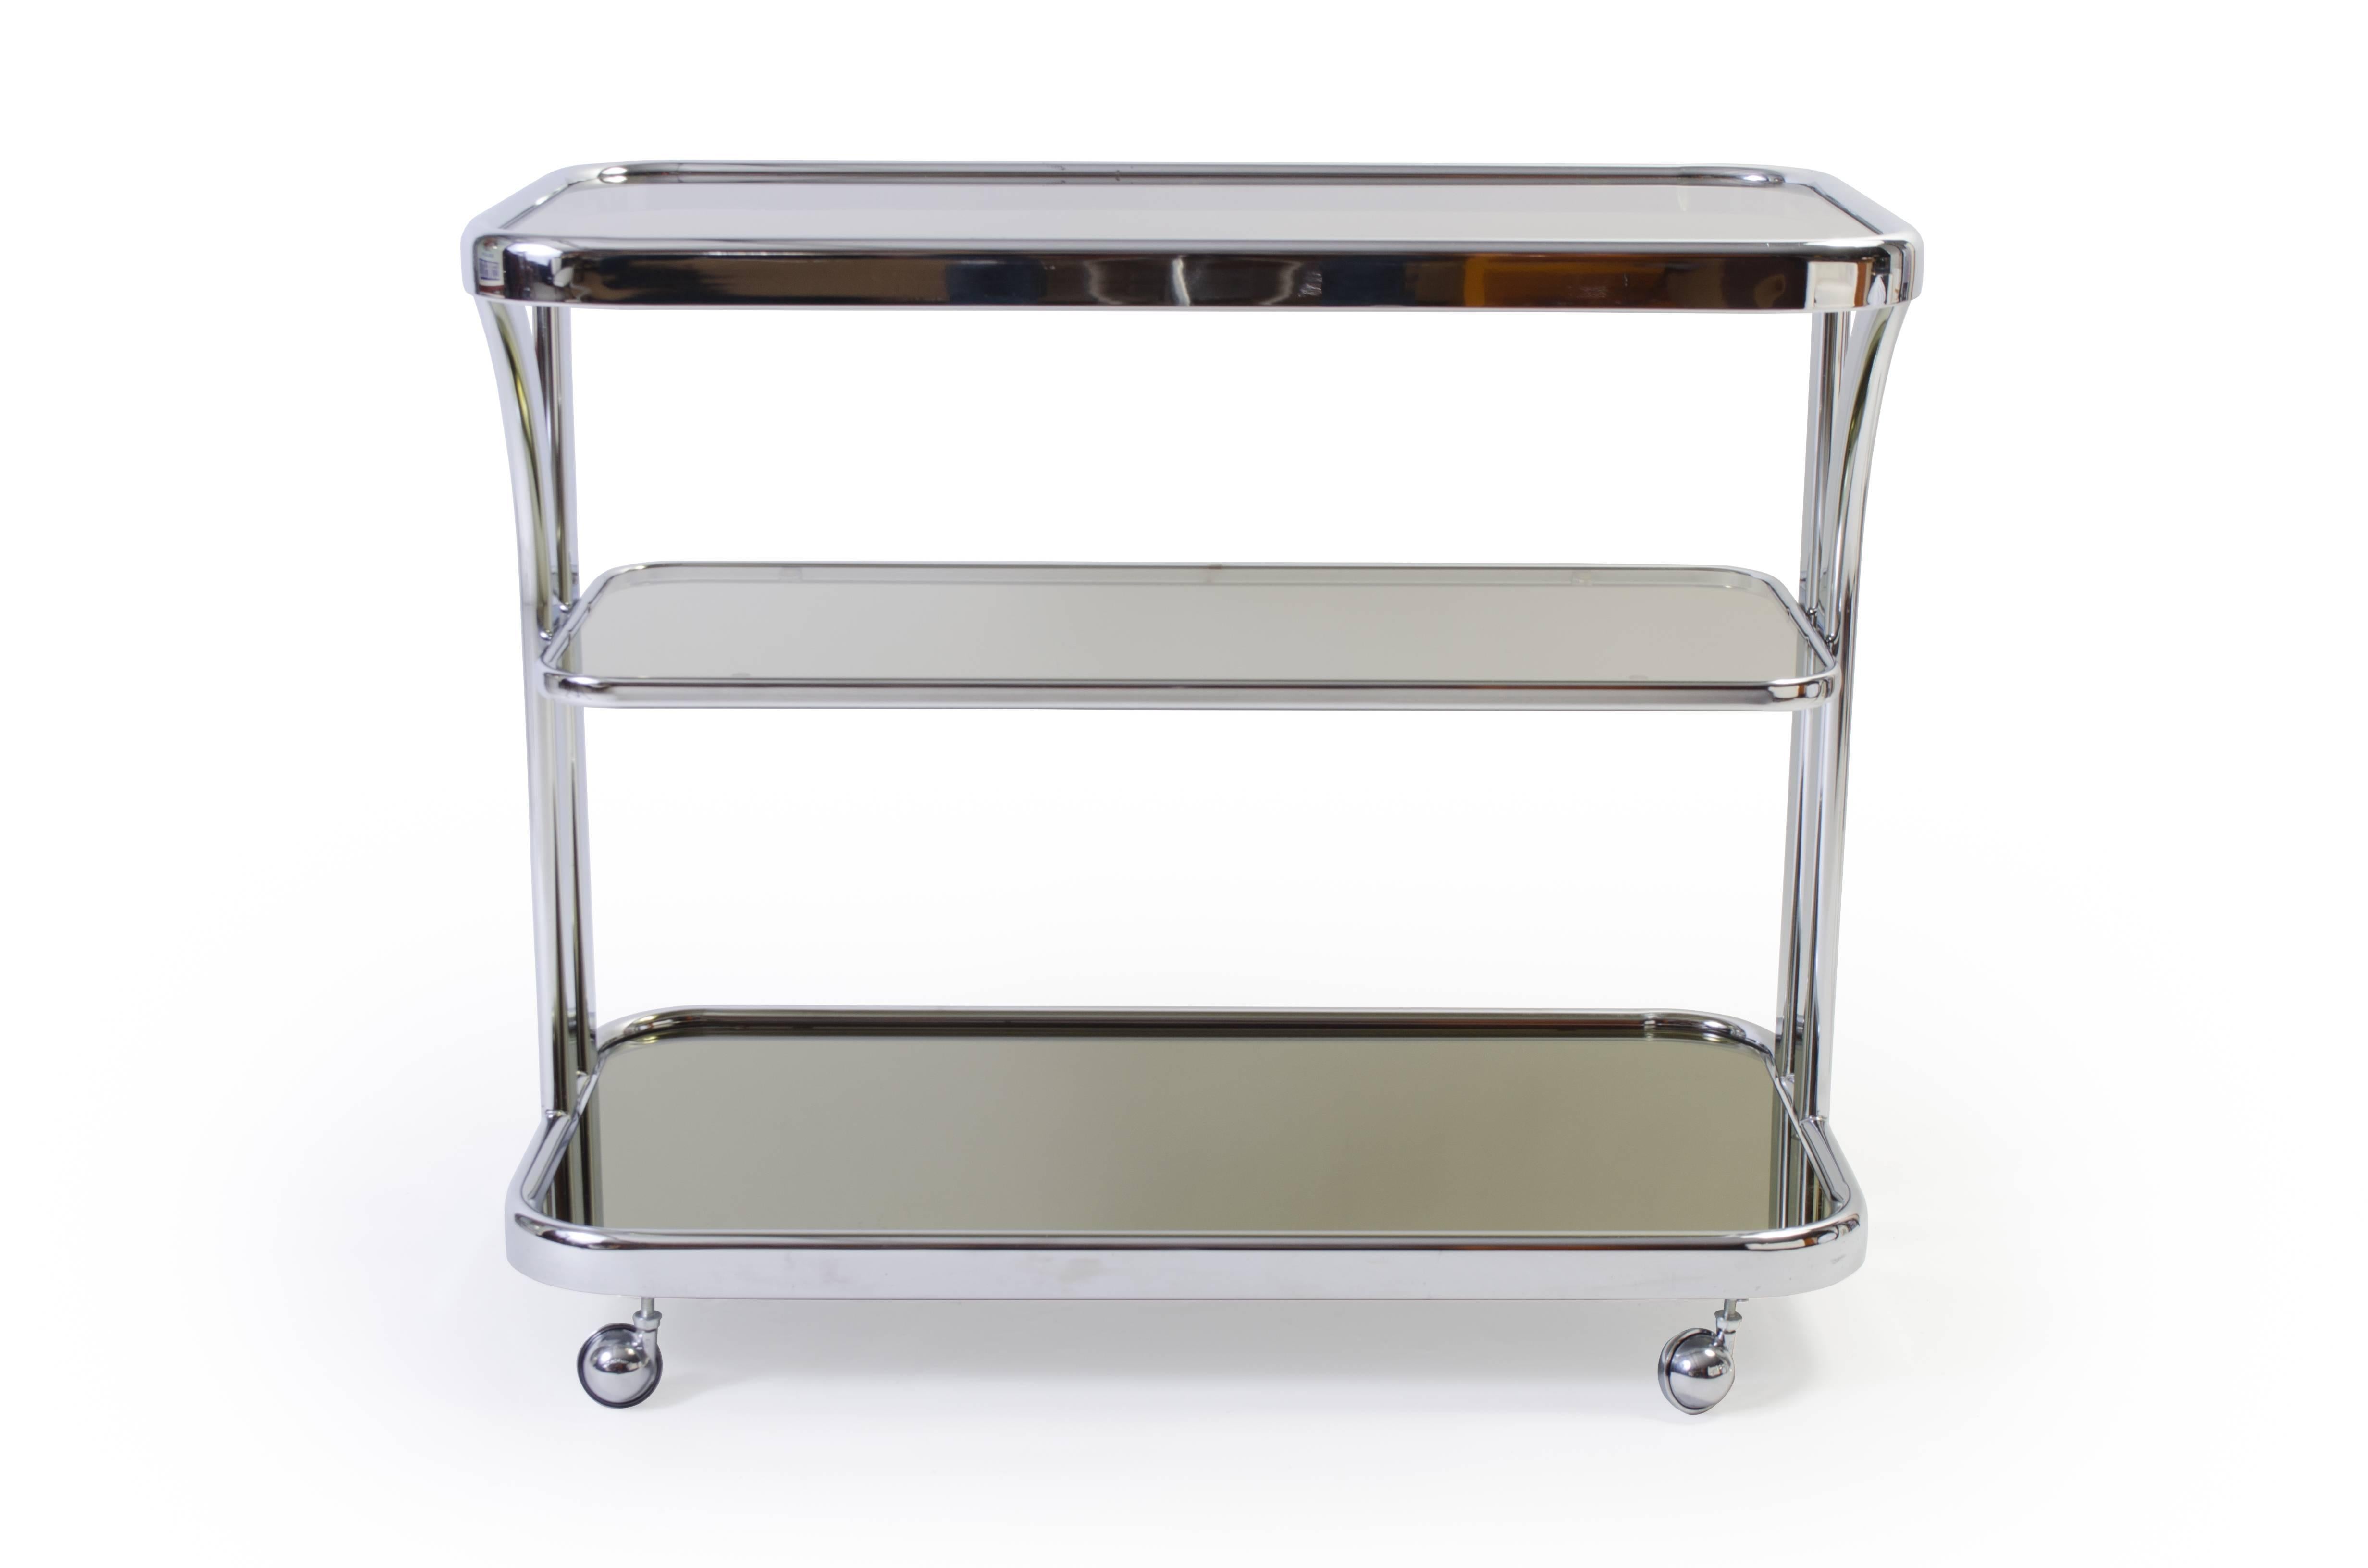 A great design, for a great party. A stunning Art Deco motif bar cart featuring a chrome frame and three tiers. Each tier is surfaced with smoked glass with rounded corners fitting perfectly into the frame. Chrome ball casters finish this piece off,